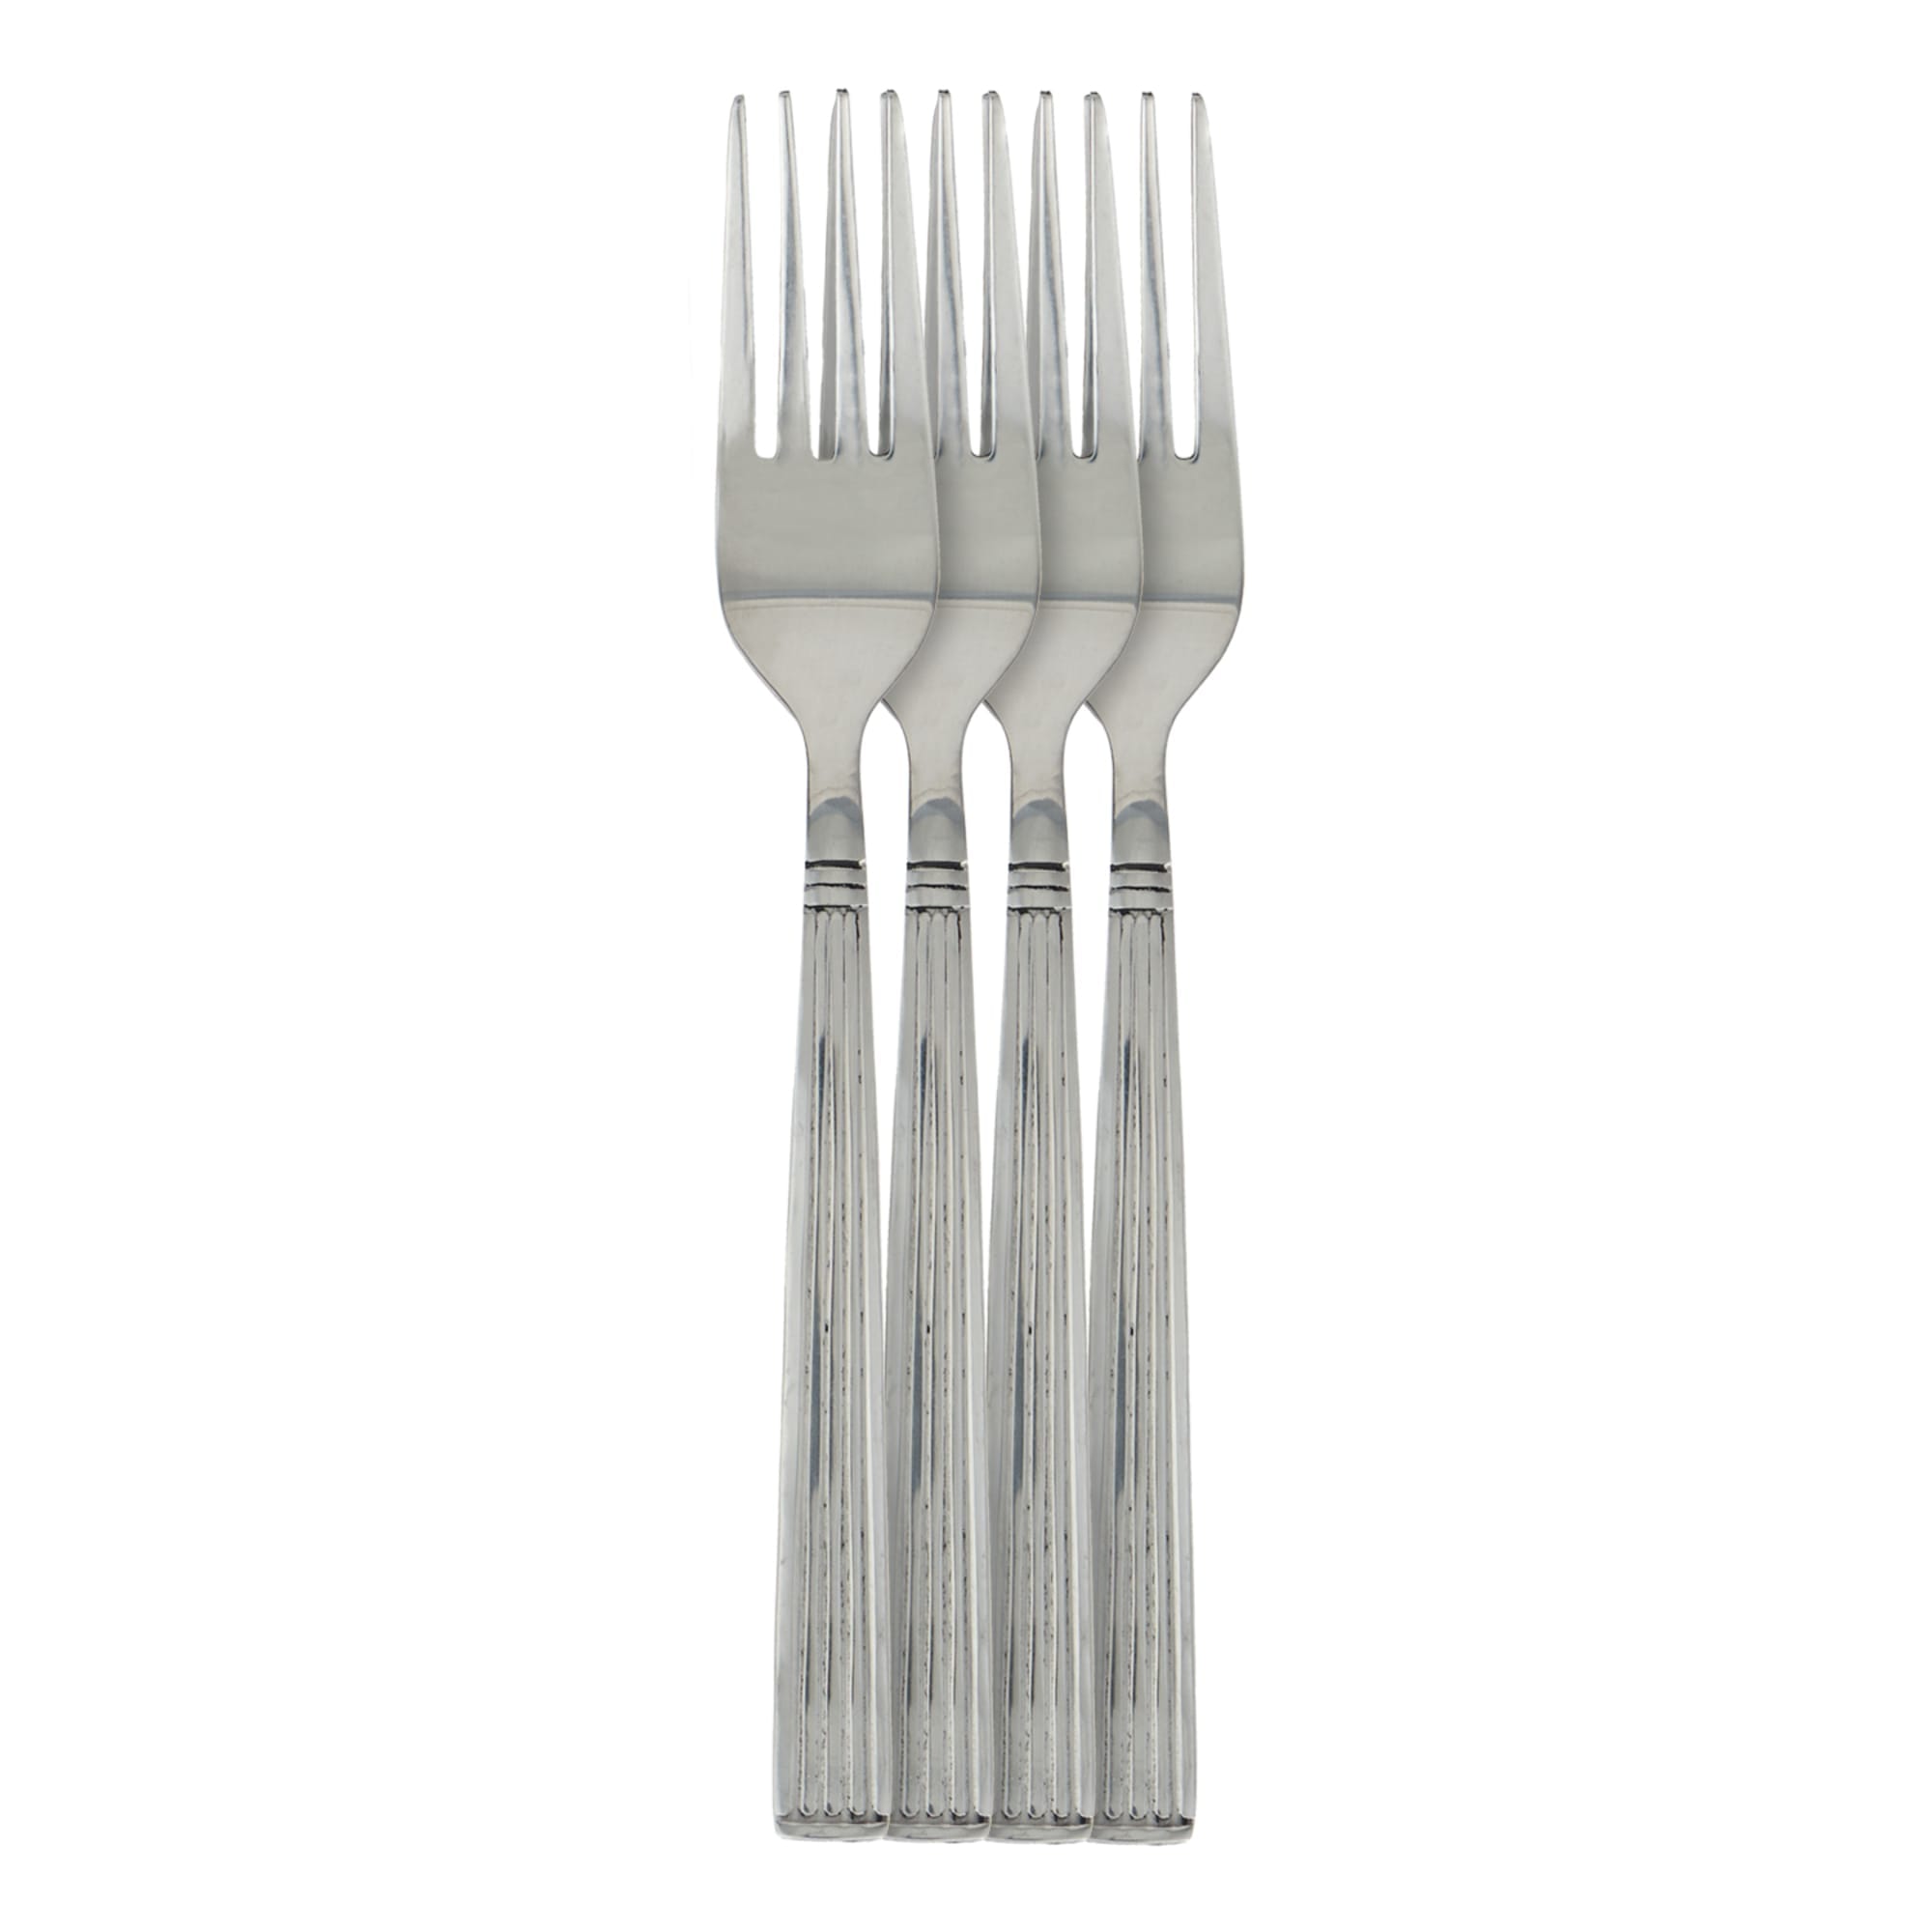 16-Piece Stainless Steel Flatware Set - 4 Table Settings, Includes Dinner Forks, Knives, Tablespoons, Teaspoons $8.00 EACH, CASE PACK OF 12